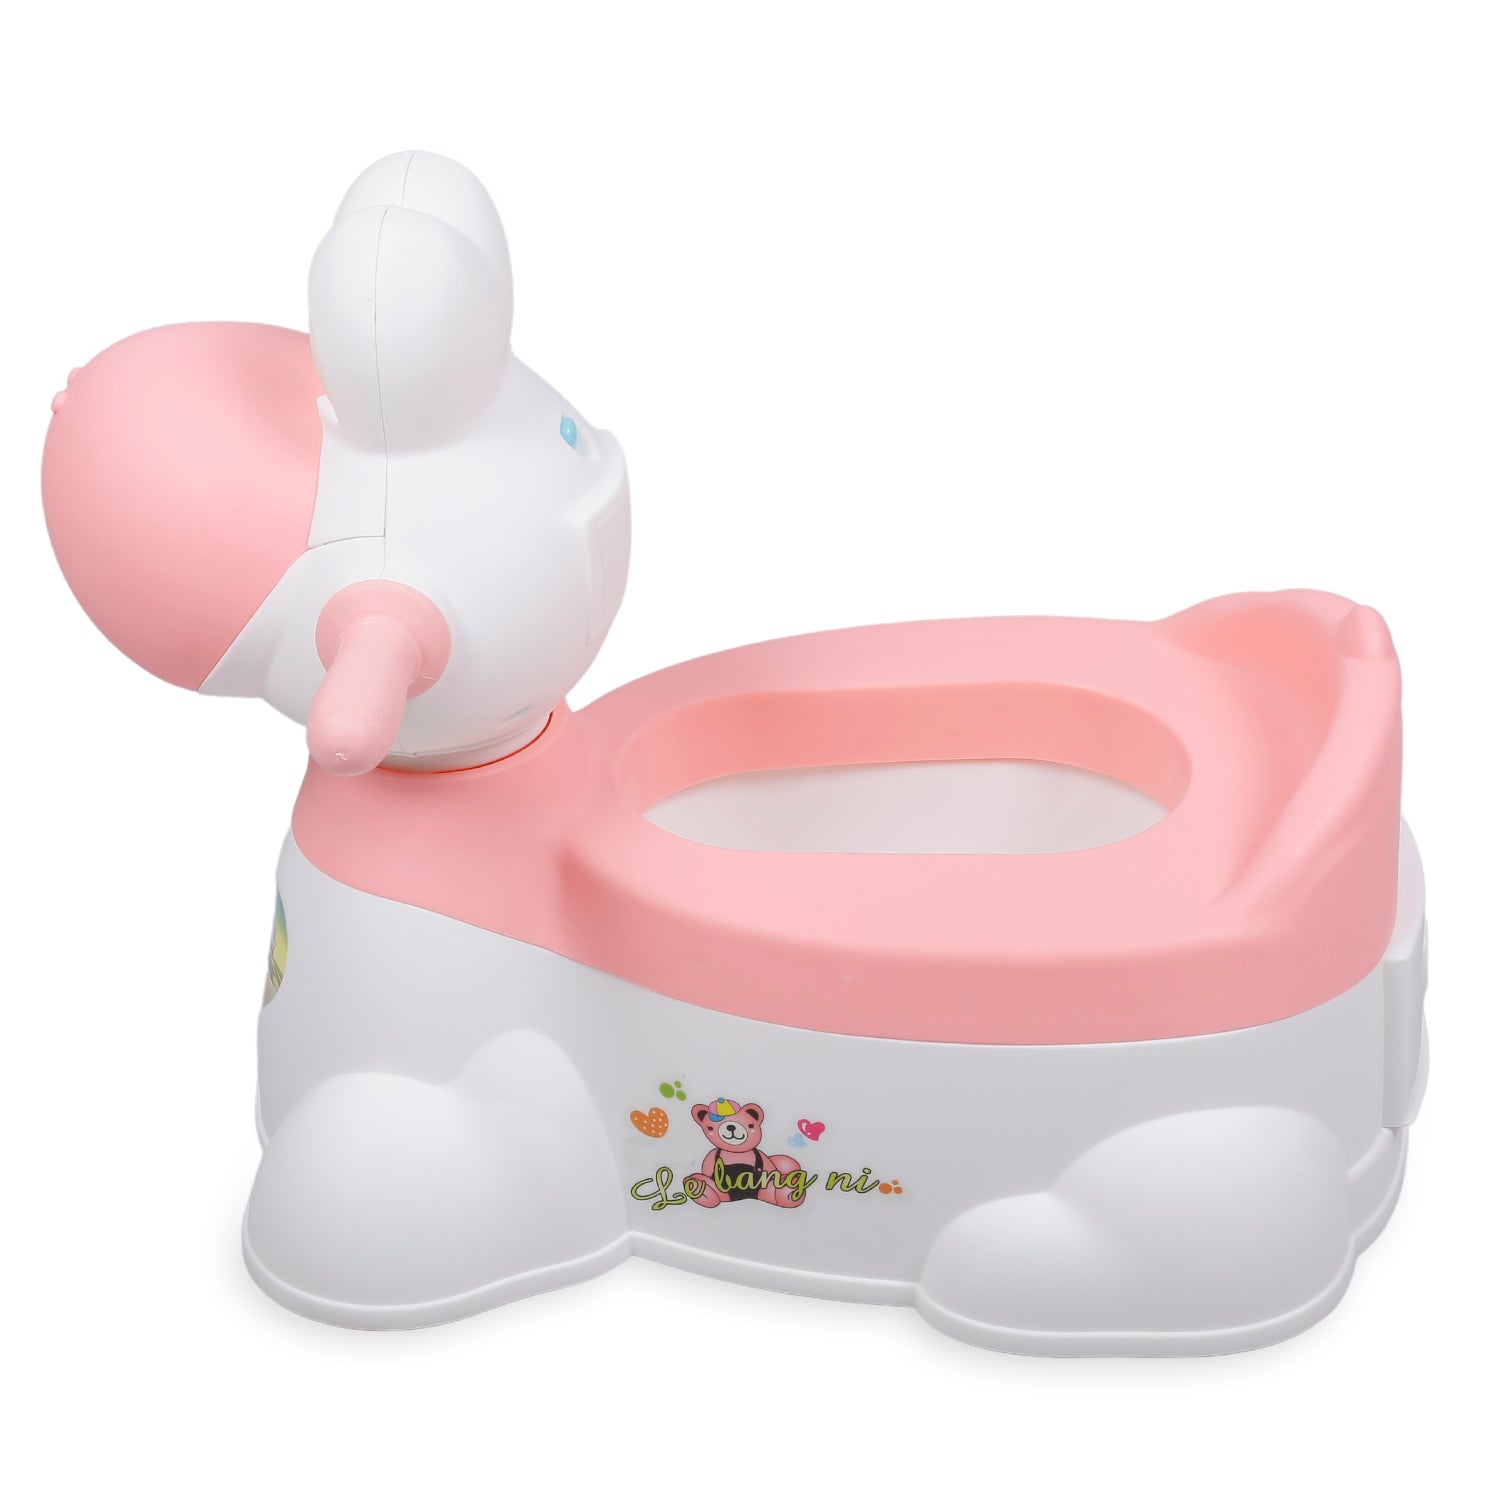 Baby Moo Toilet Training Potty Chair Puppy Design Pink